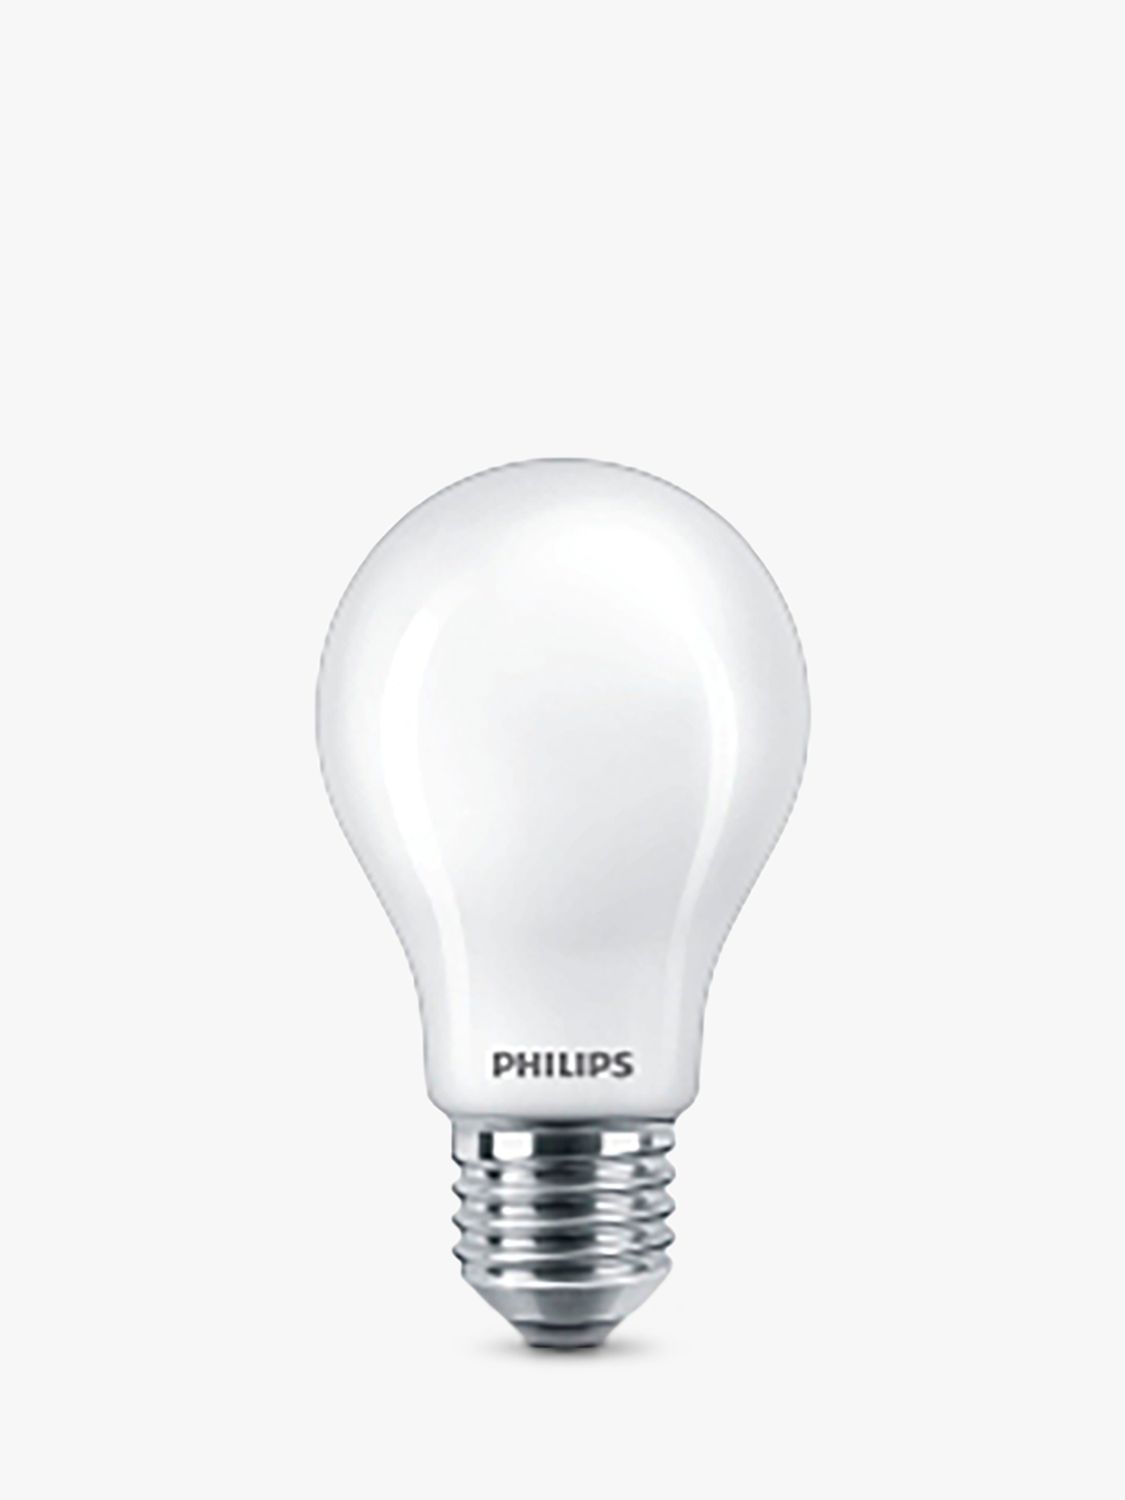 Photo of Philips 12w es led dimmable classic bulb white